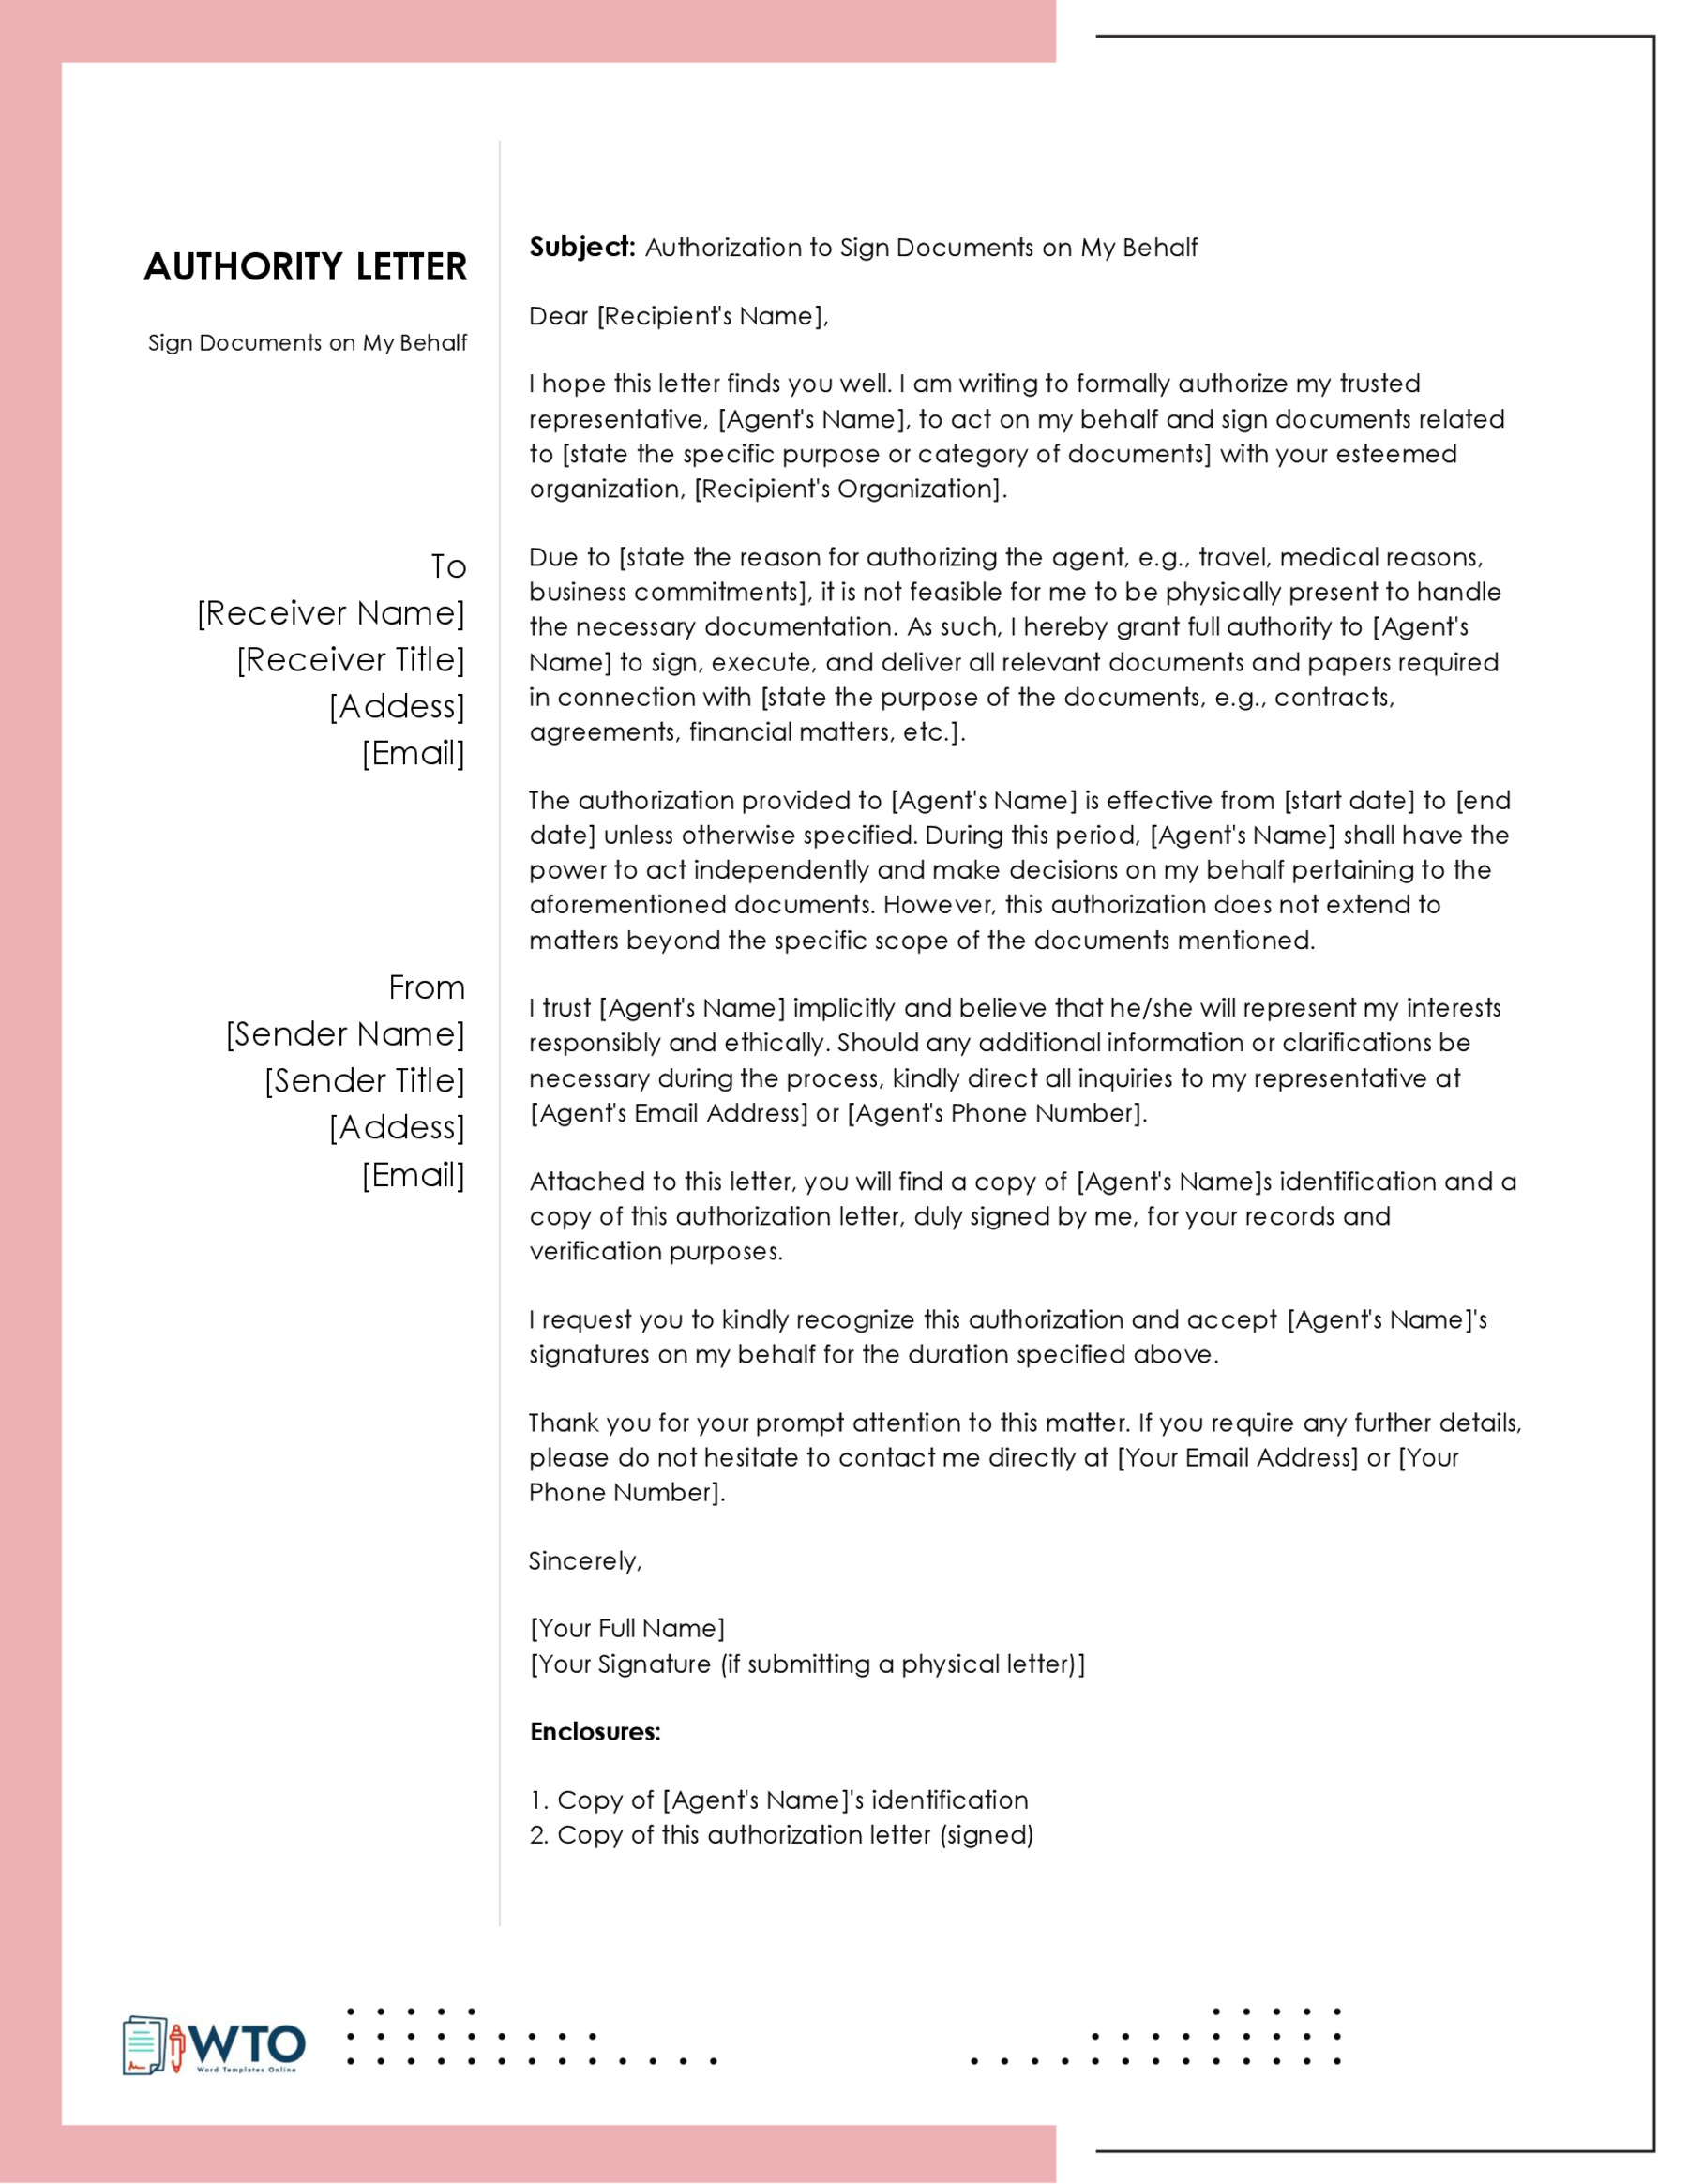 Letter to Sign Documents on My Behalf Template in ms word